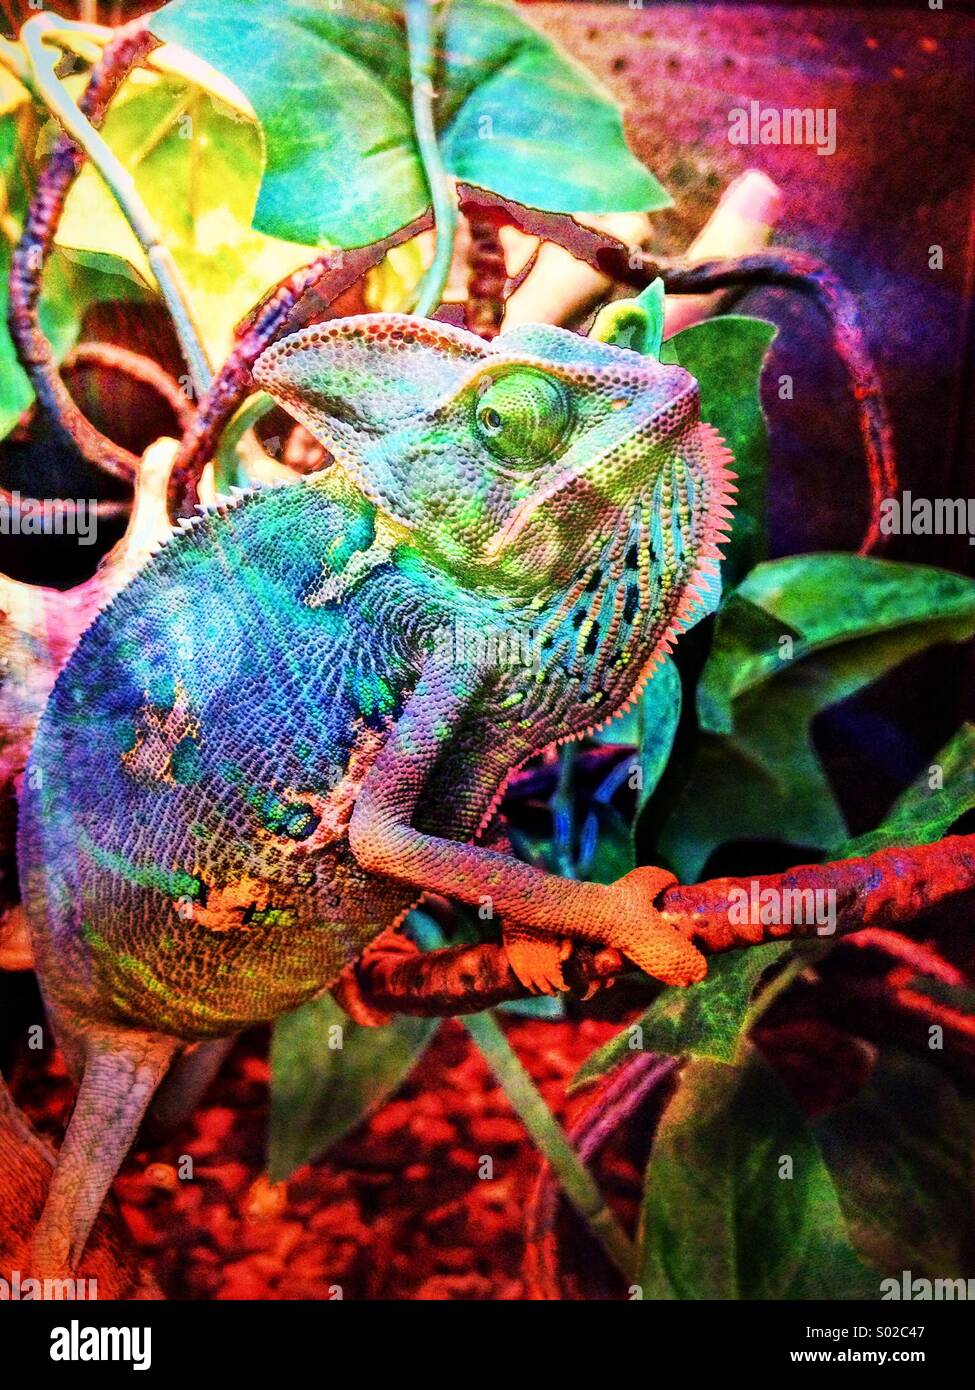 Chameleon with a colorful pattern effect Stock Photo